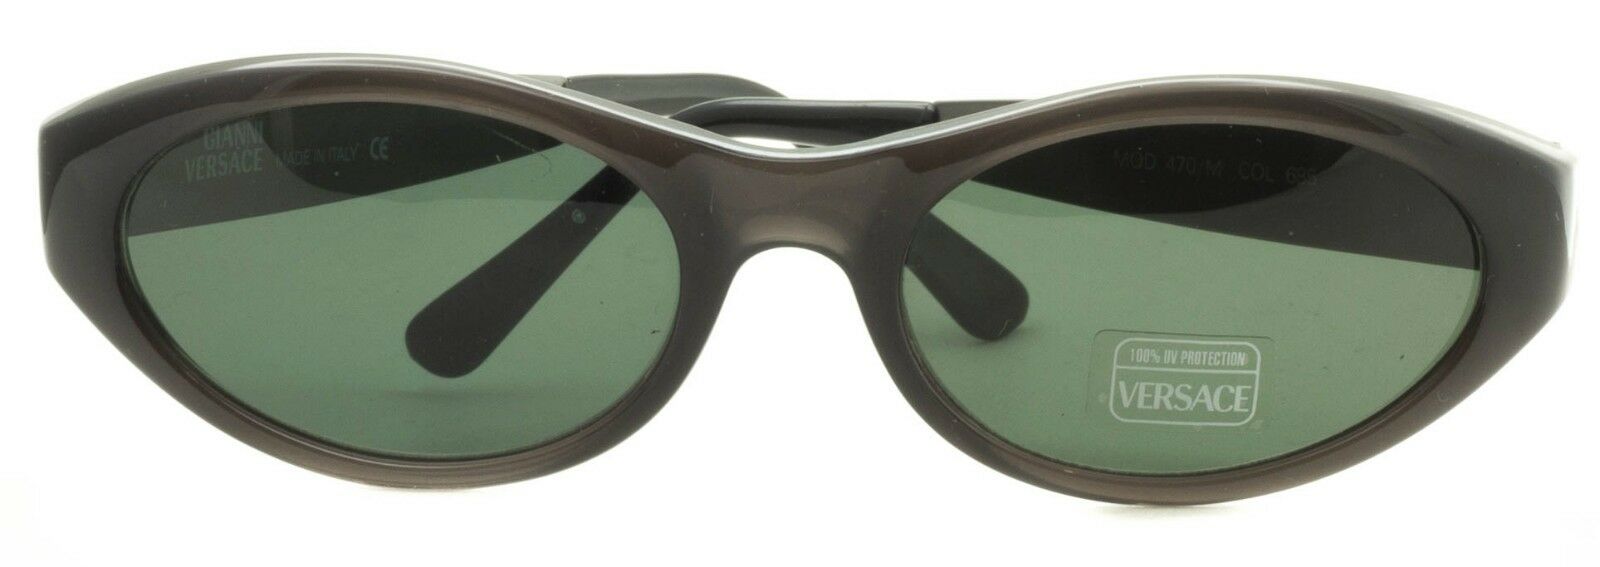 VERSACE MOD 470/M COL 685 Vintage Sunglasses Shades BNIB Brand New in Case ITALY